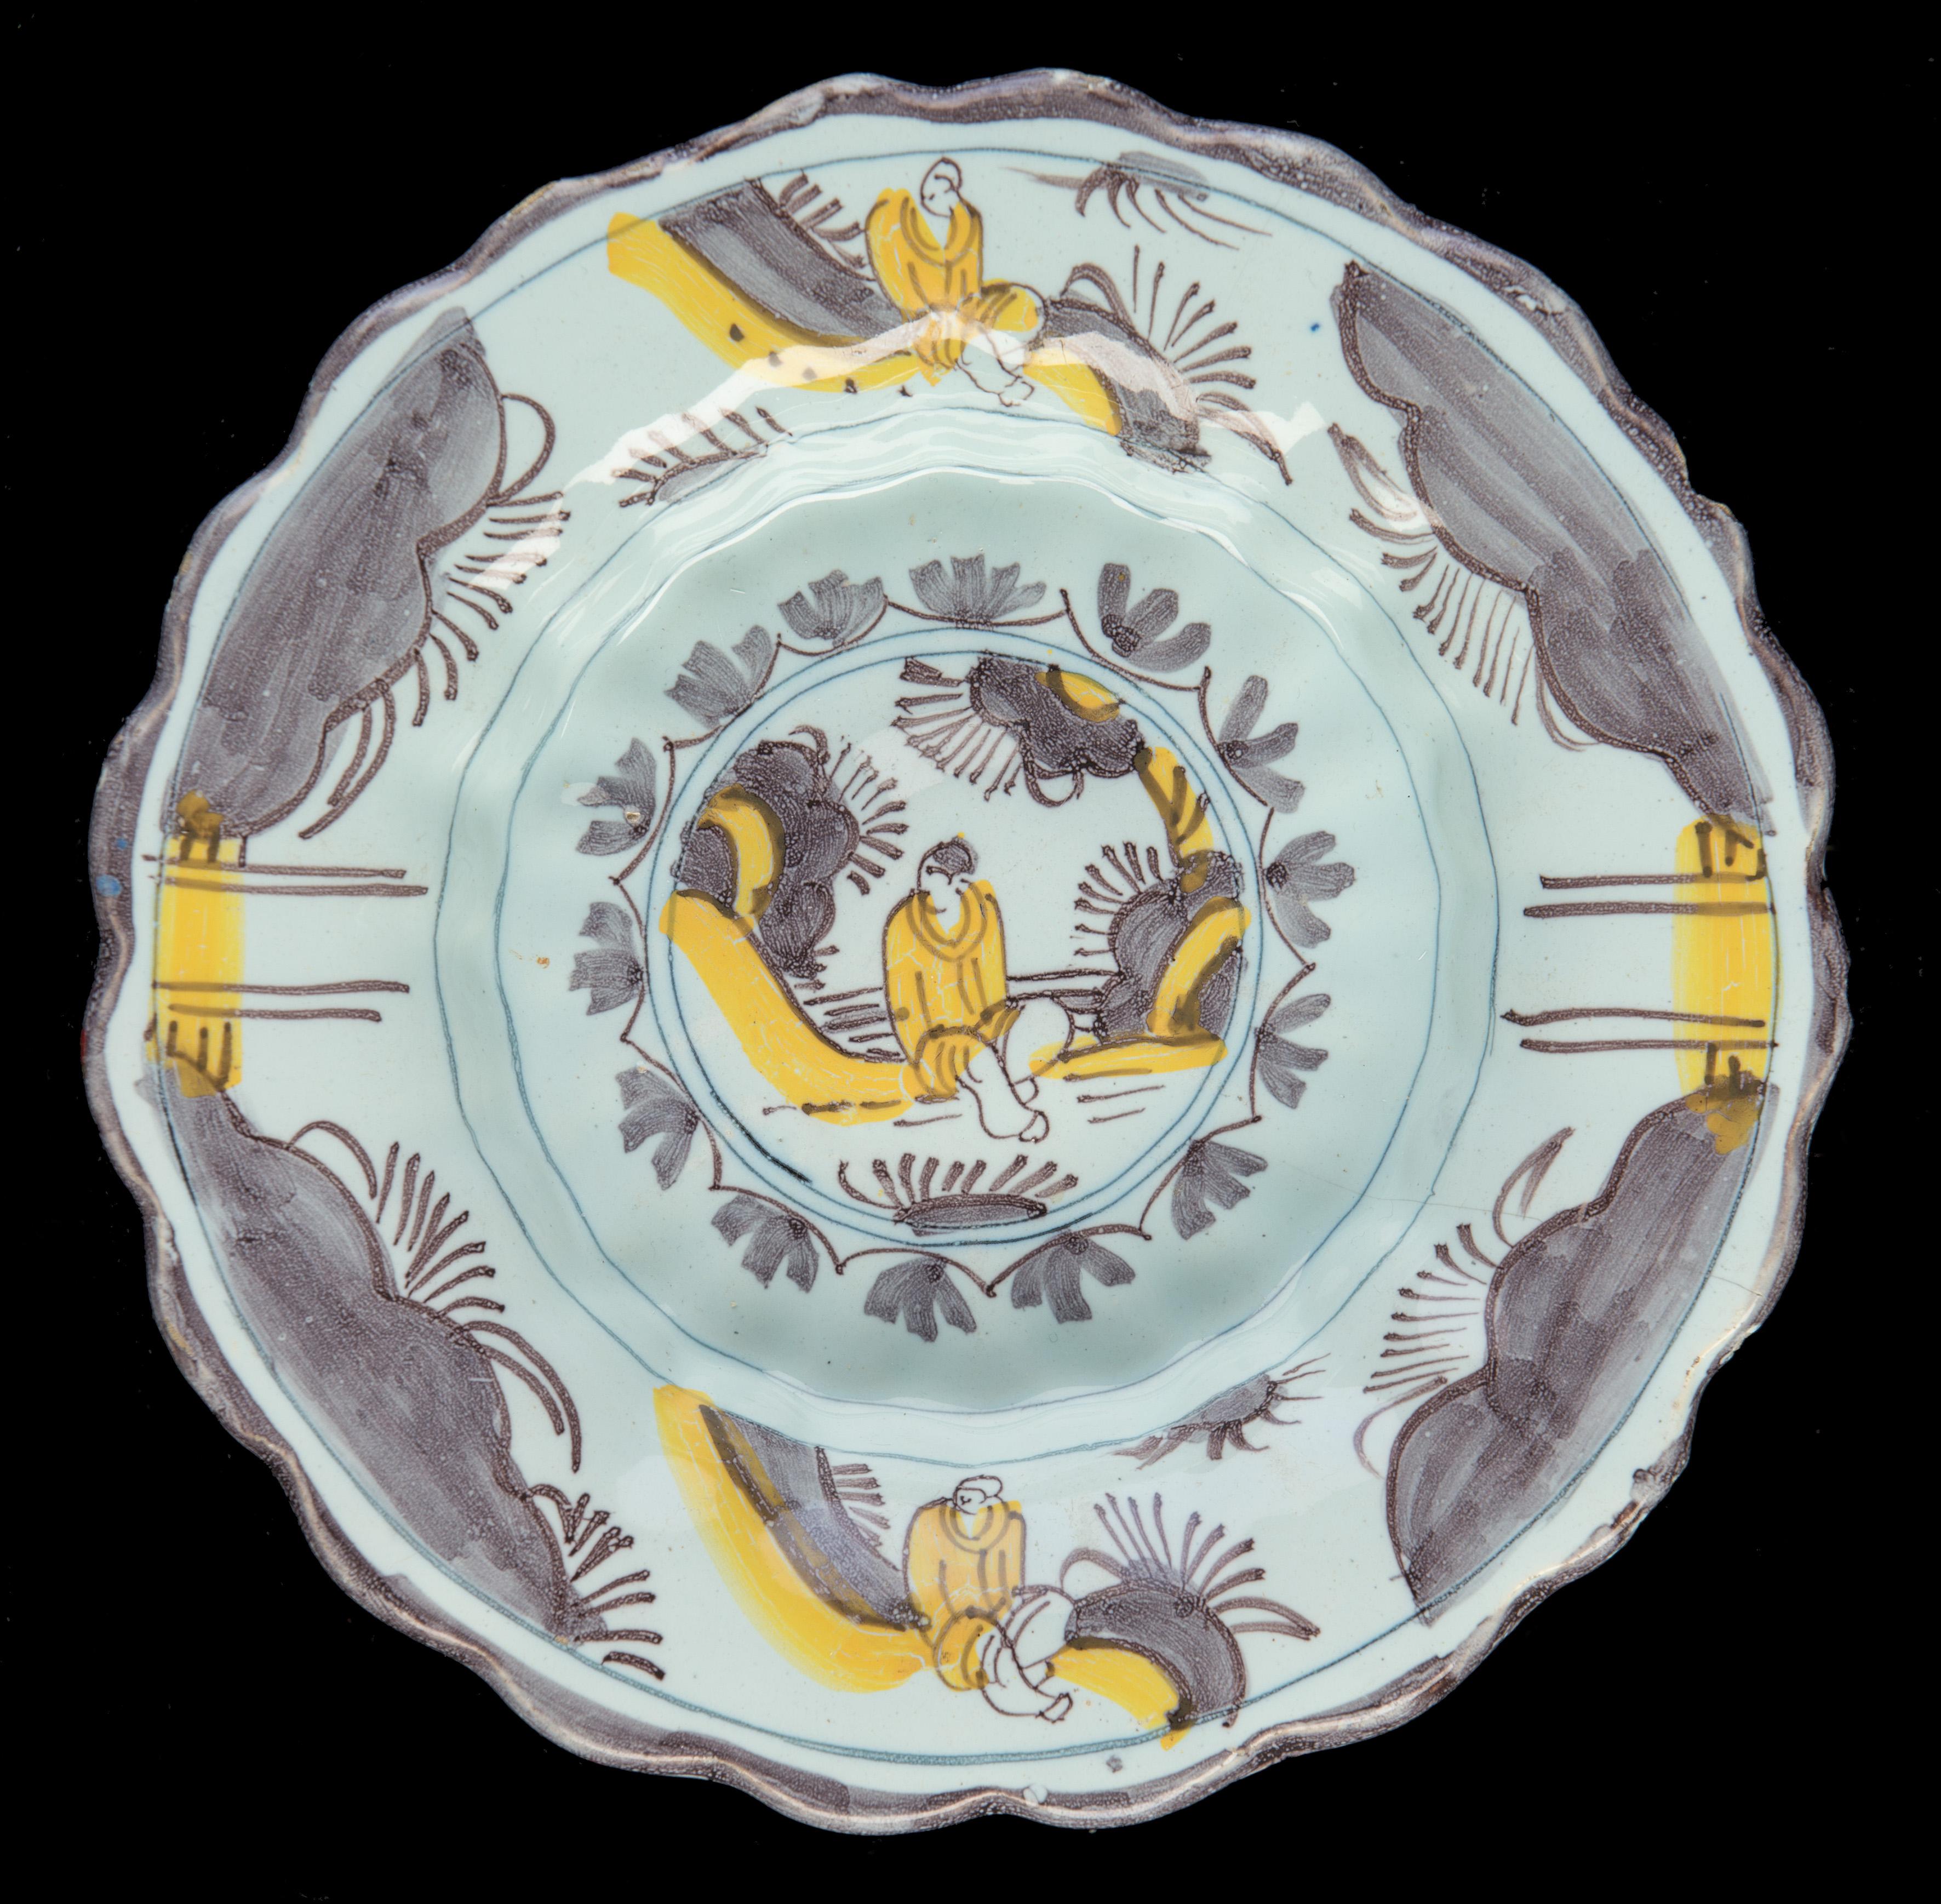 Lobed dish with purple and yellow chinoiserie landscape Delft, 1680-1700
Dimensions: diameter 22 cm / 8.66 in.

The lobed dish is composed of twenty double lobes and is painted in purple and yellow with a simplified chinoiserie landscape. A